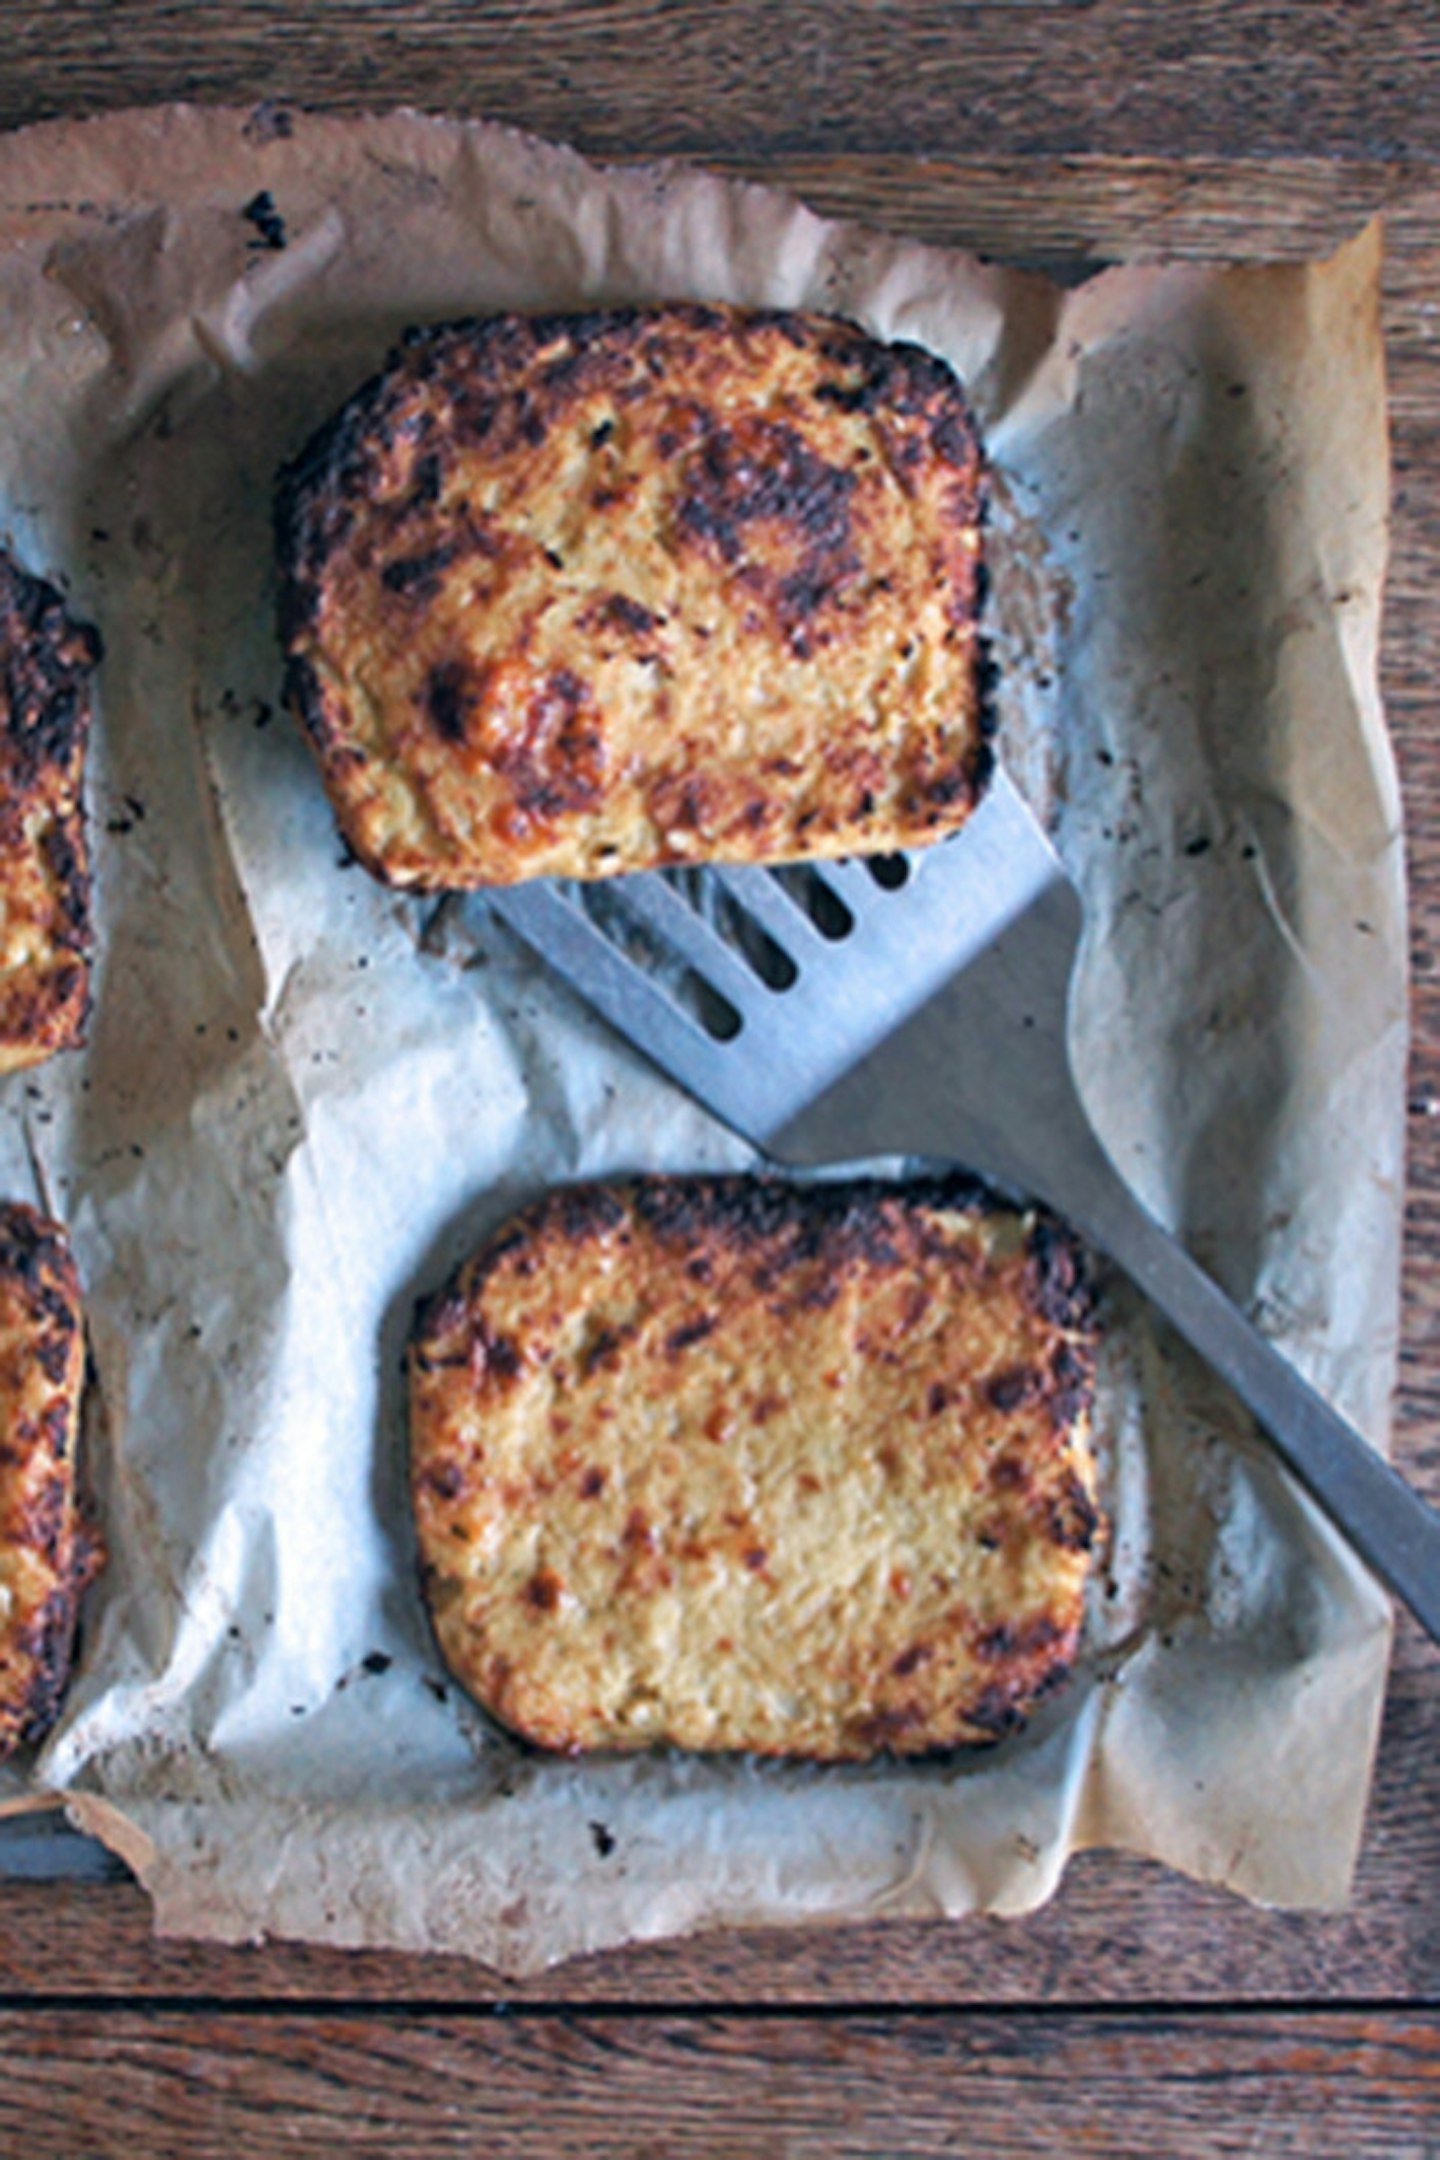 Tess Ward's Carb-free Cheese Toastie